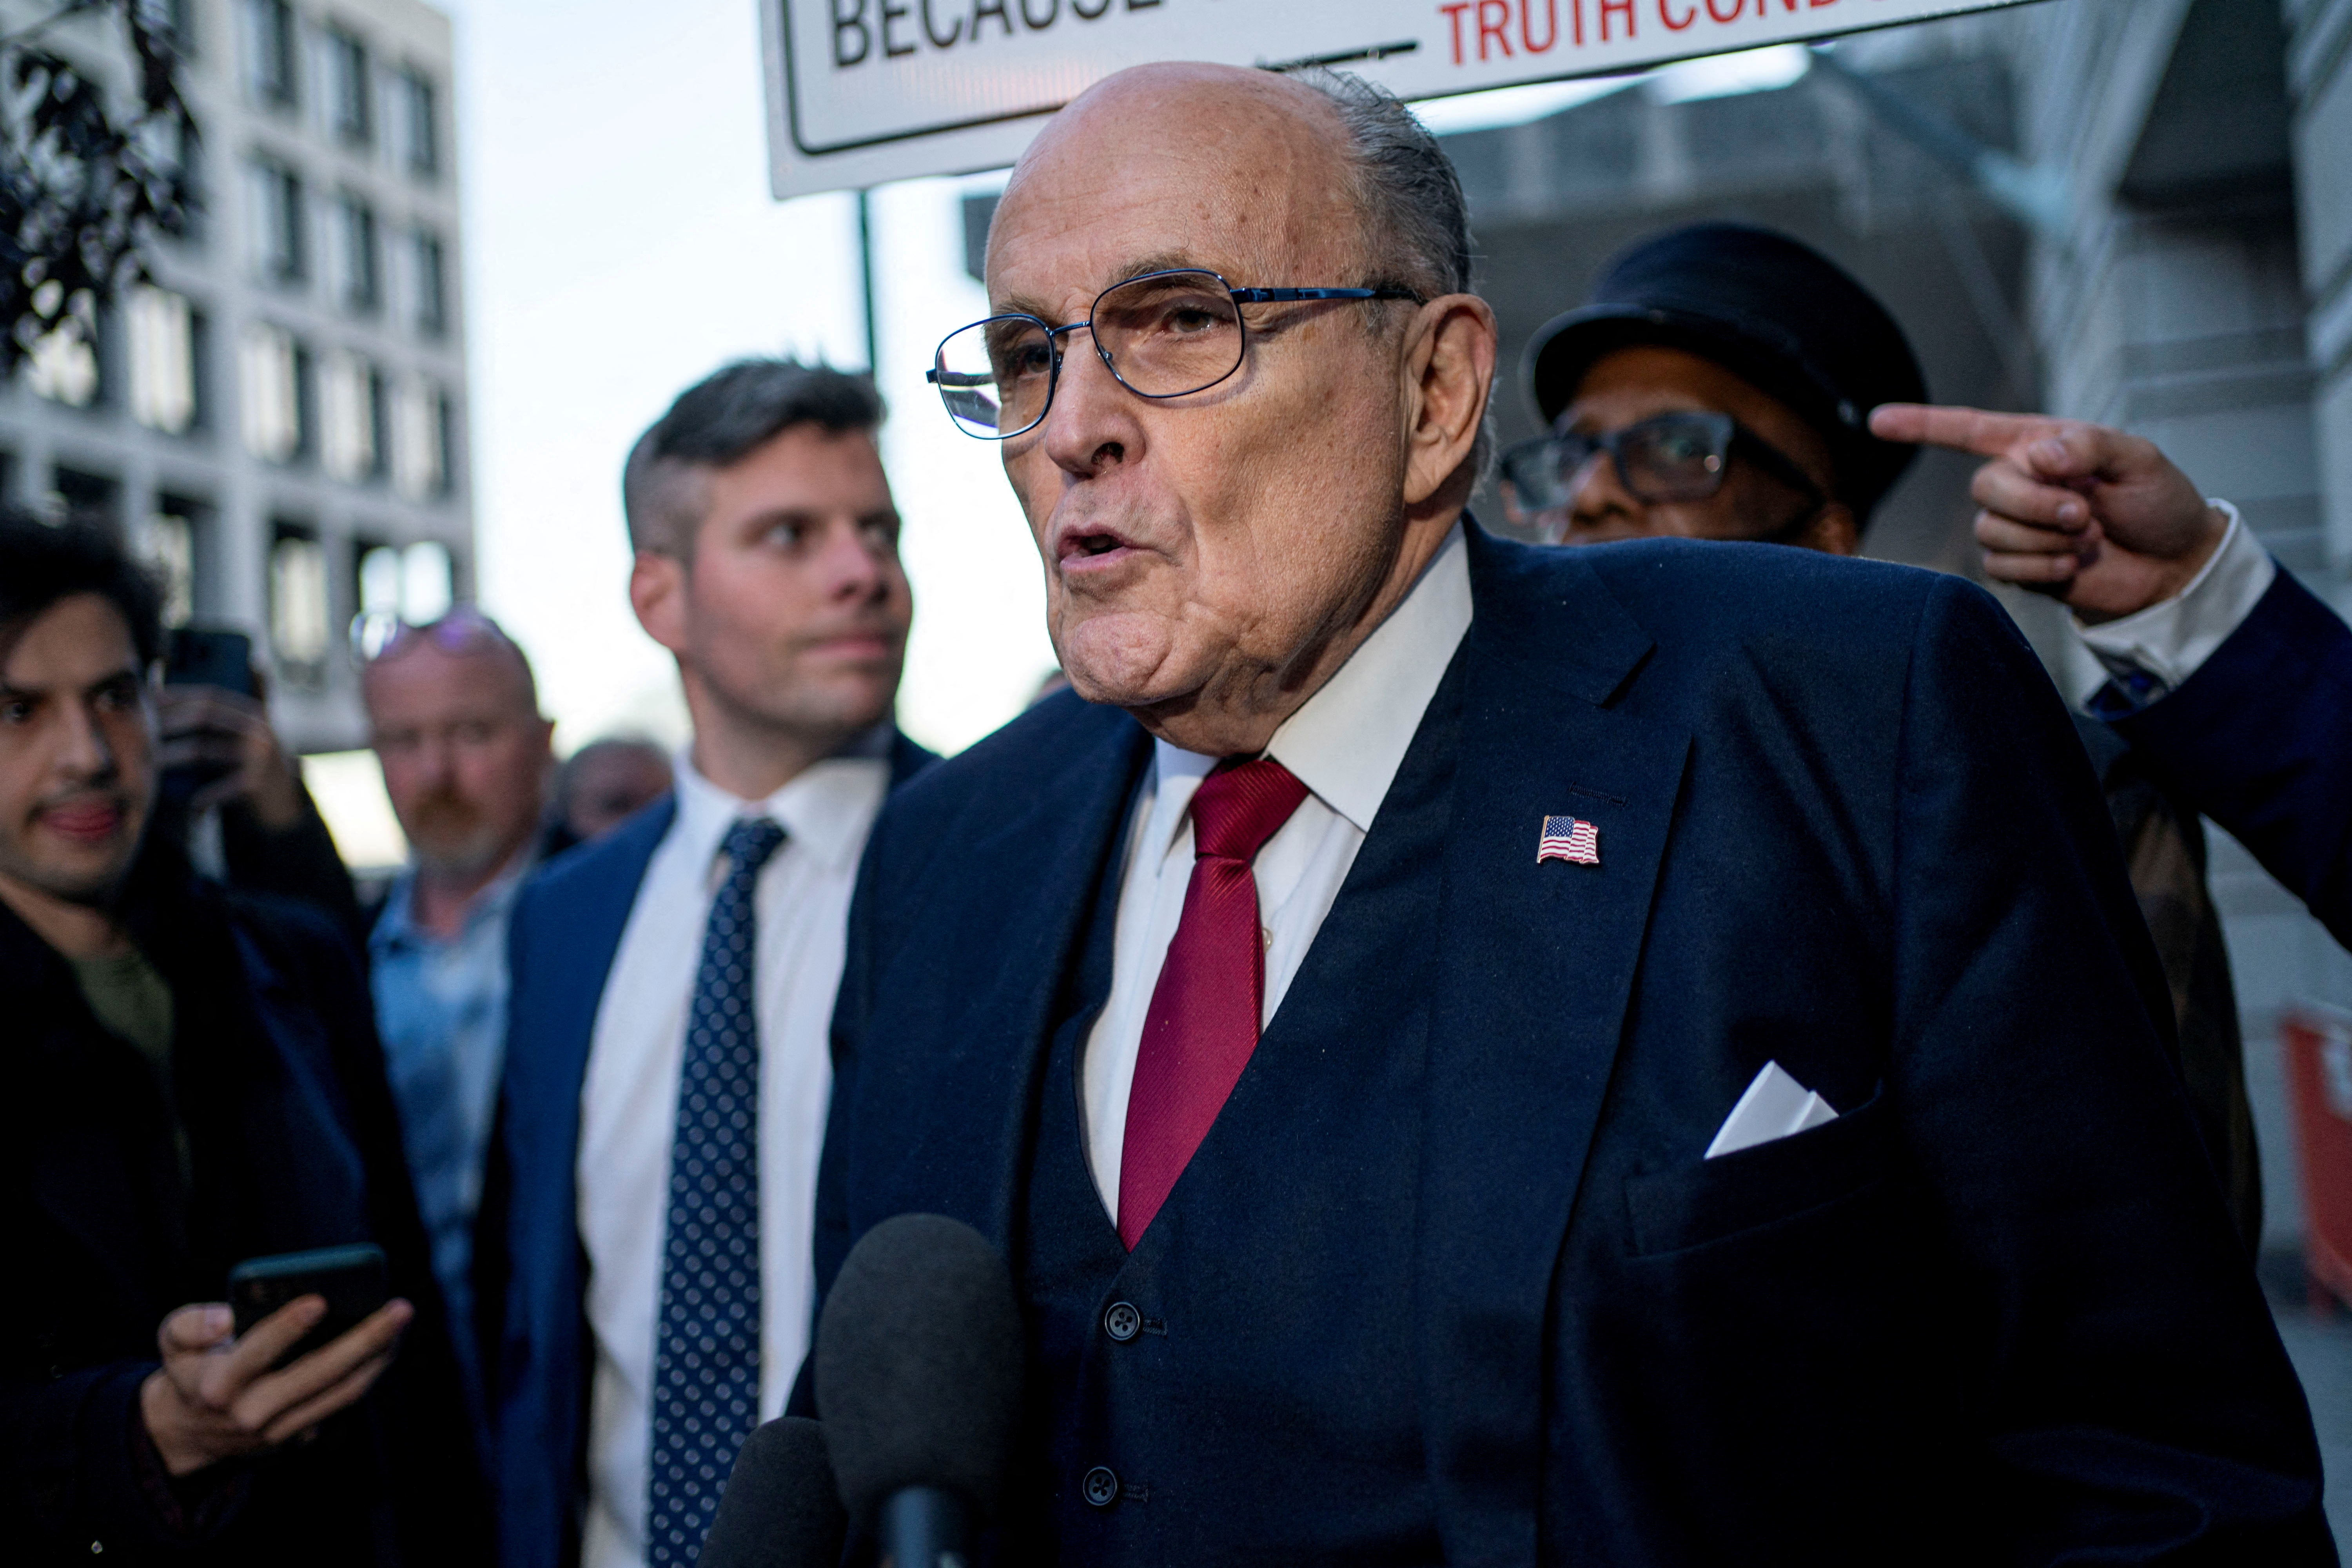 Former New York Mayor Rudy Giuliani departs defamation lawsuit at the District Courthouse in Washington